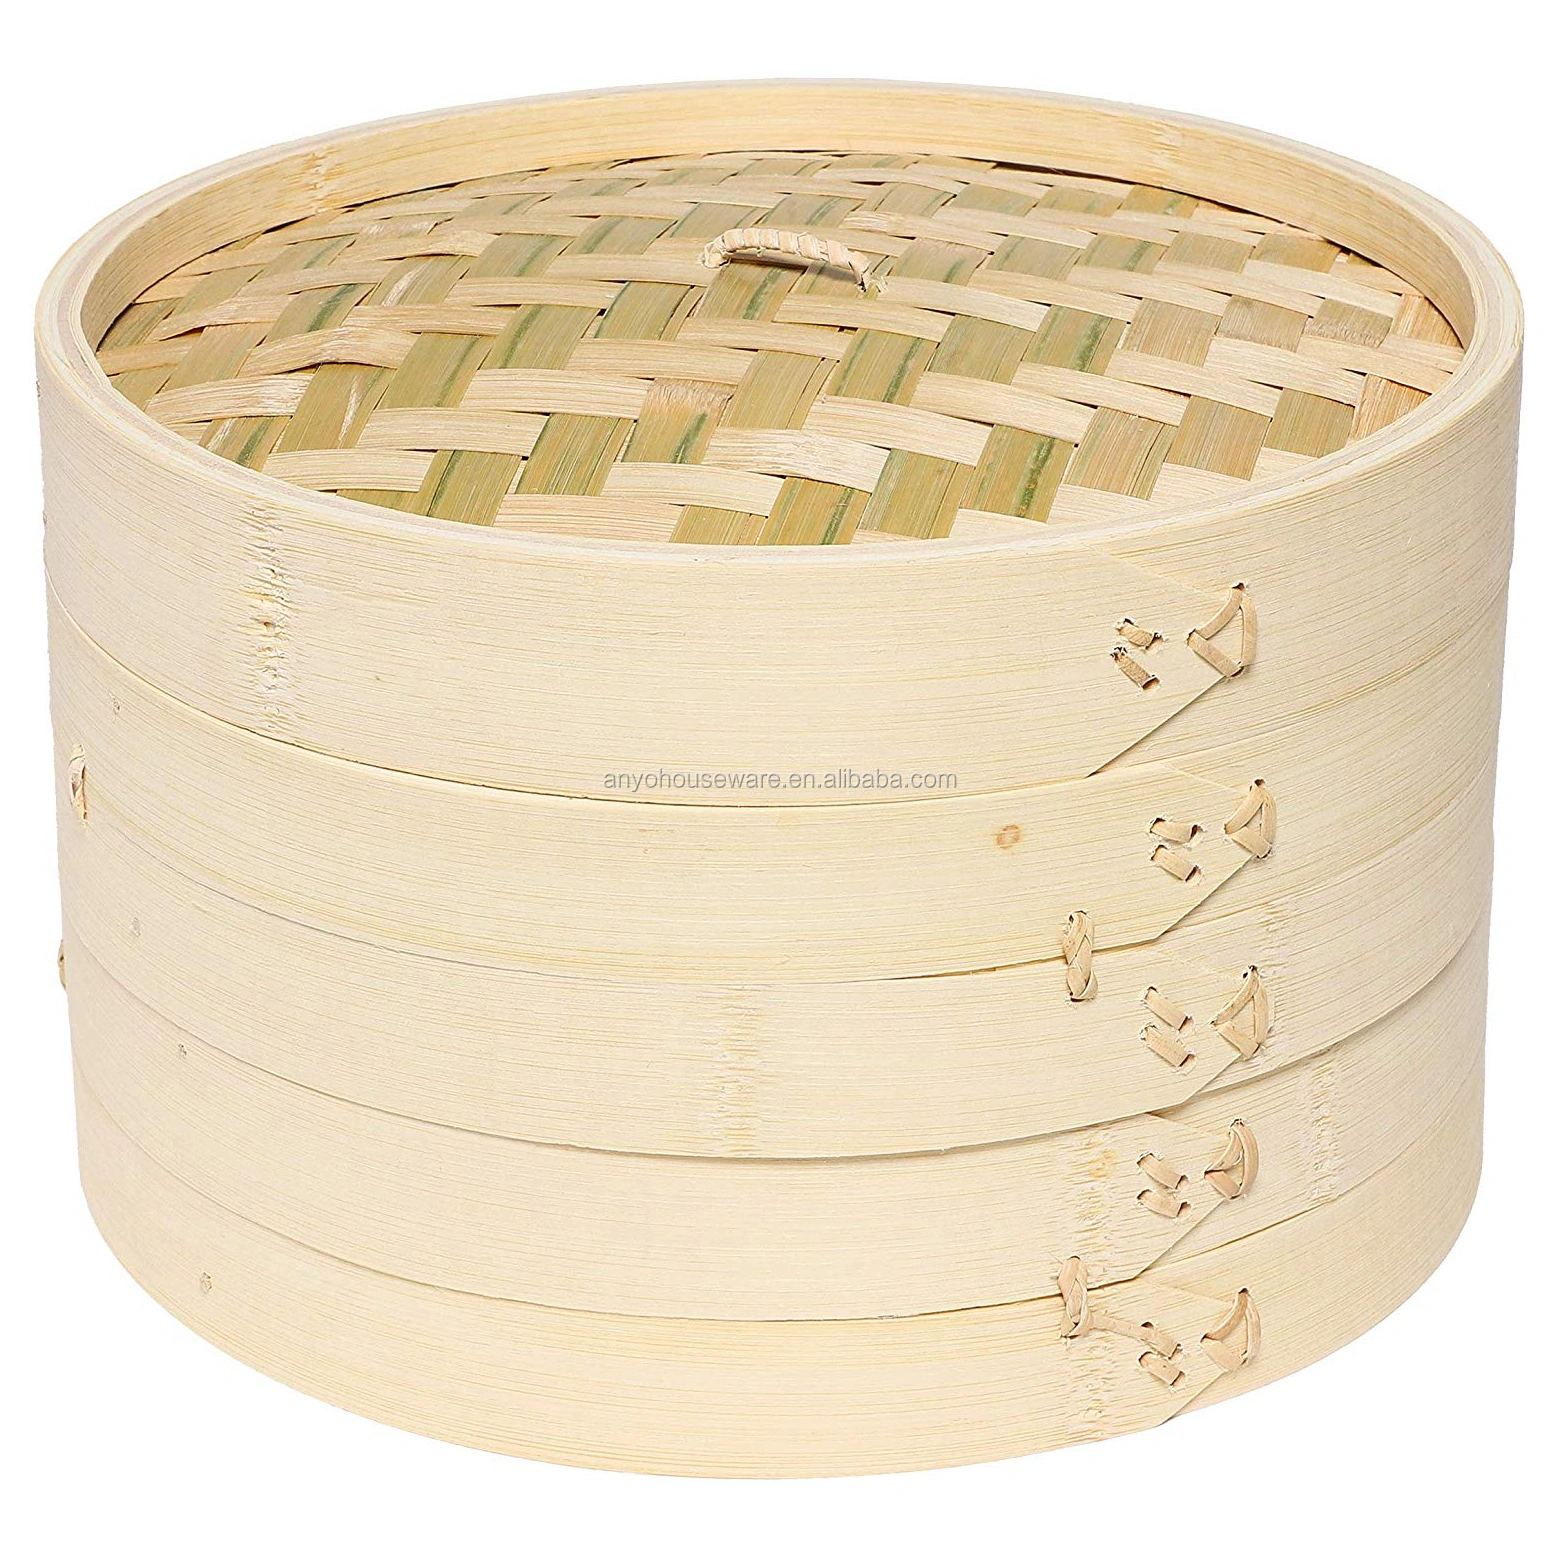 Wholesale Kitchen Organic Natural Bamboo Rice Momo Steamer Basket 10 Inch With Lid